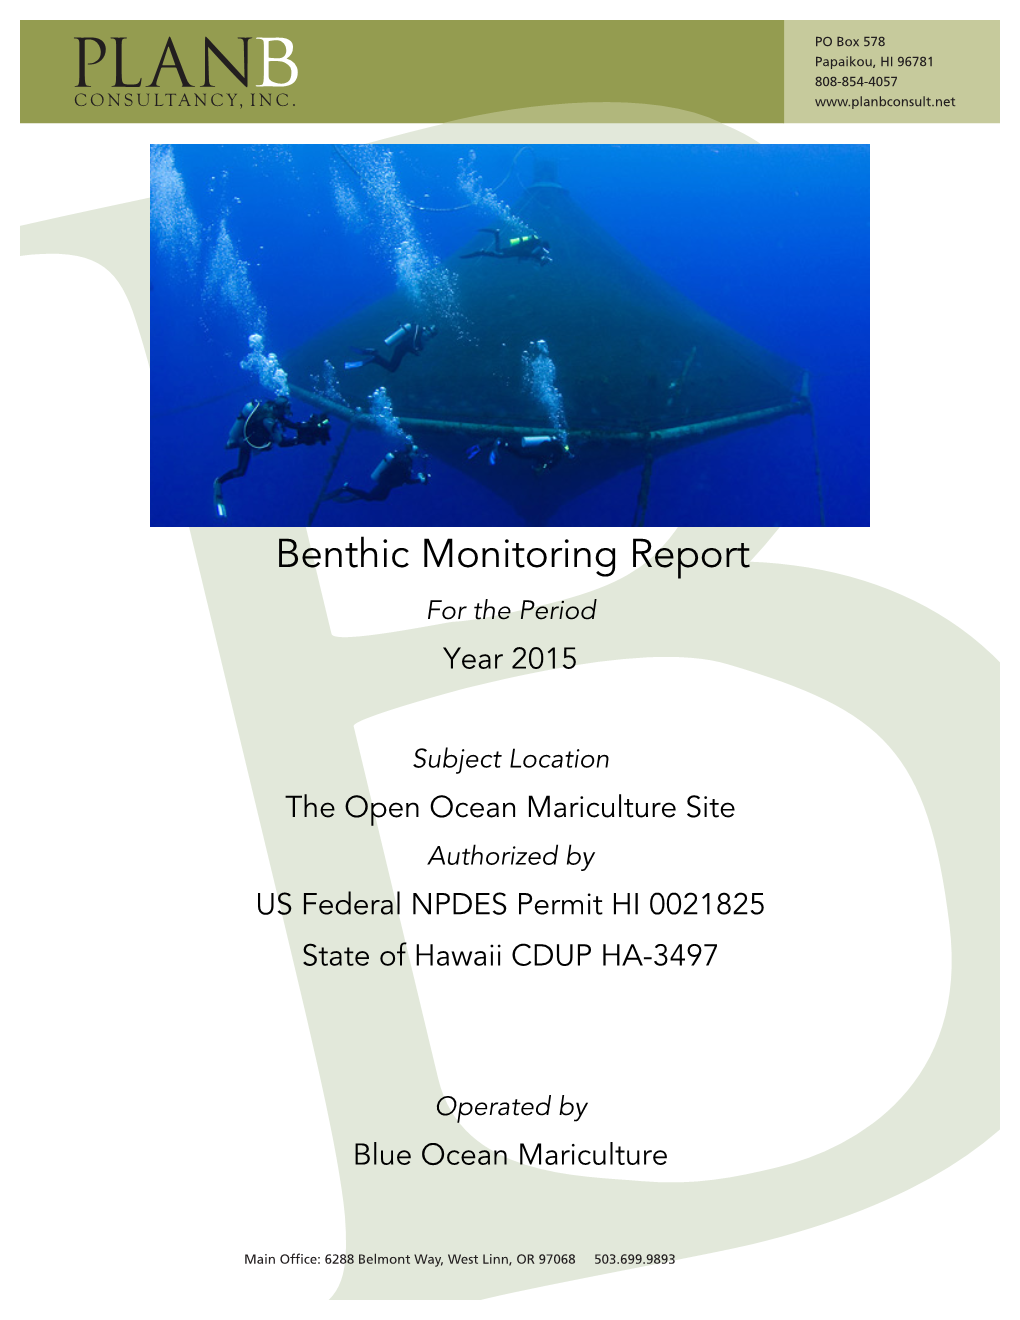 Benthic Monitoring Report for the Period Year 2015